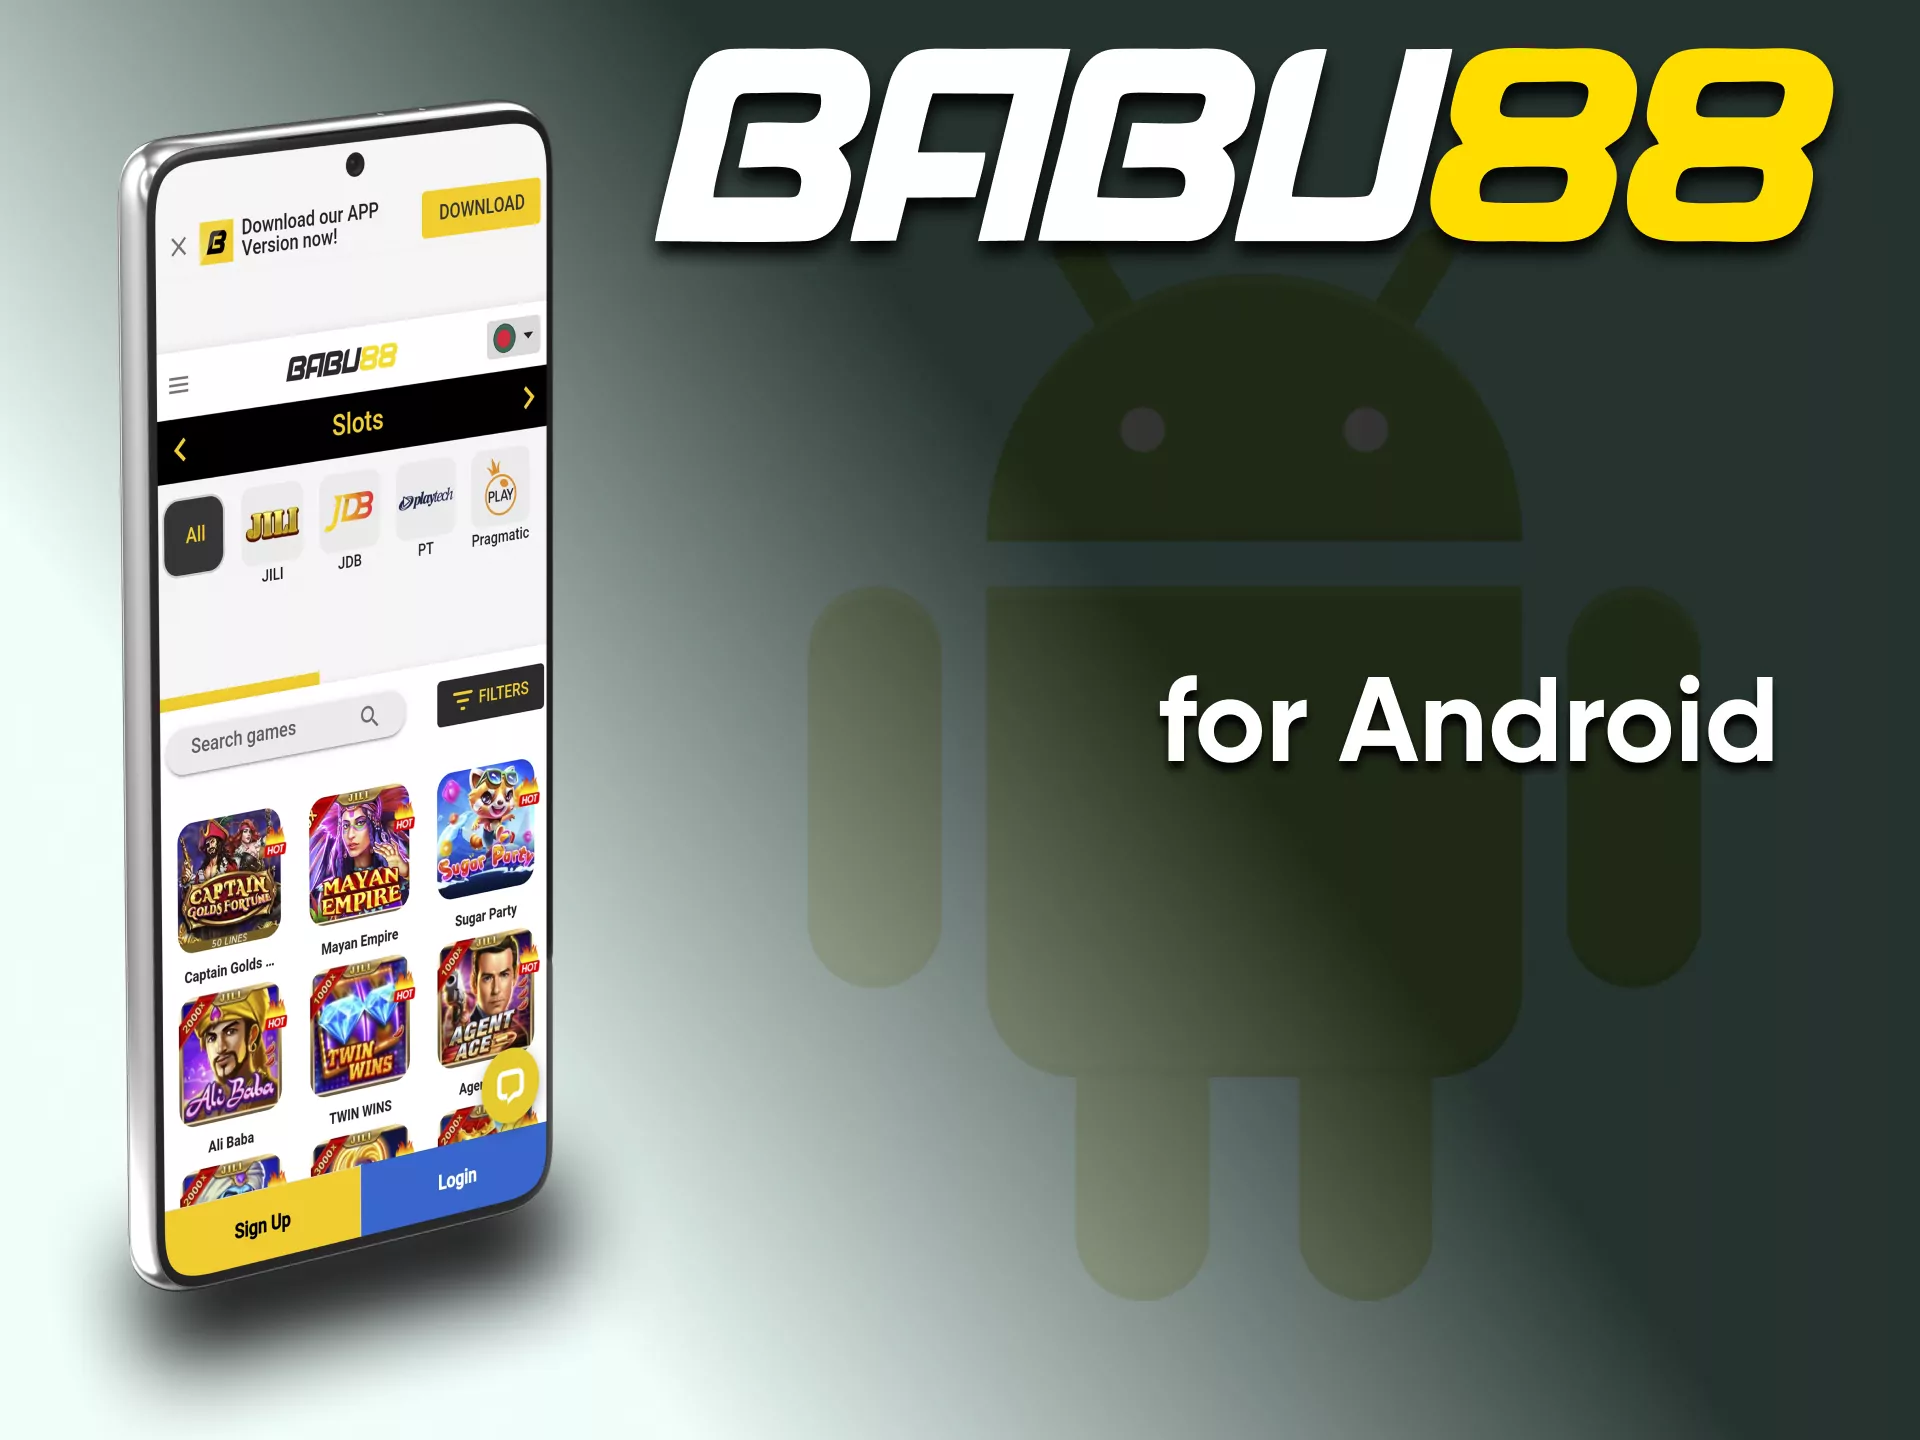 Download the android application for playing at Babu88 casino.